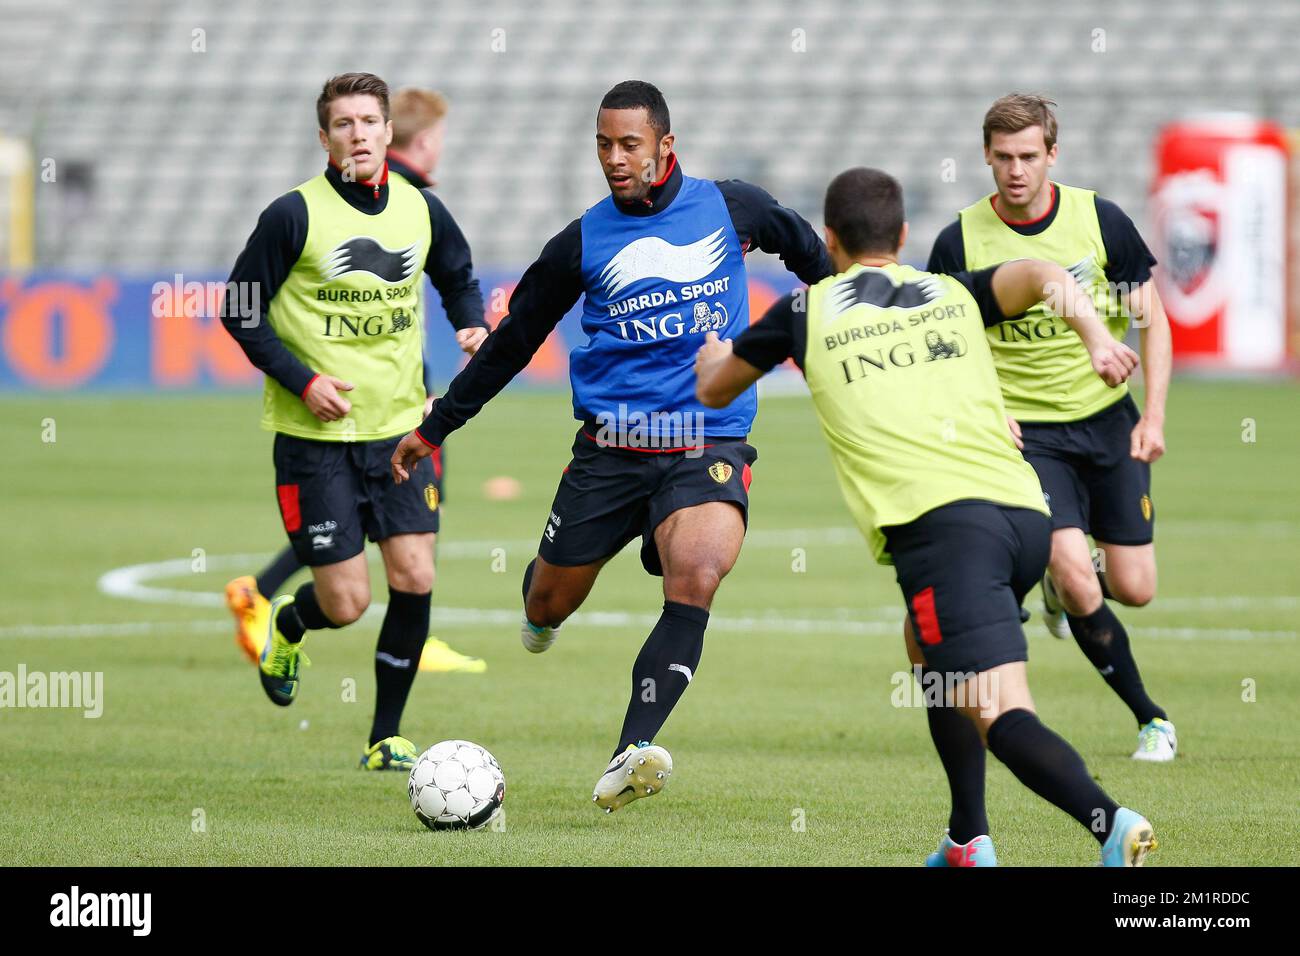 Belgium's Moussa Dembele pictured during a training session of the Belgian national soccer team Red Devils, Tuesday 13 August 2013, in the King Baudouin Stadium (Stade Roi Baudouin/Koning Boudewijnstadion), in Brussels. Red Devils will play tomorrow a friendly game against France.  Stock Photo